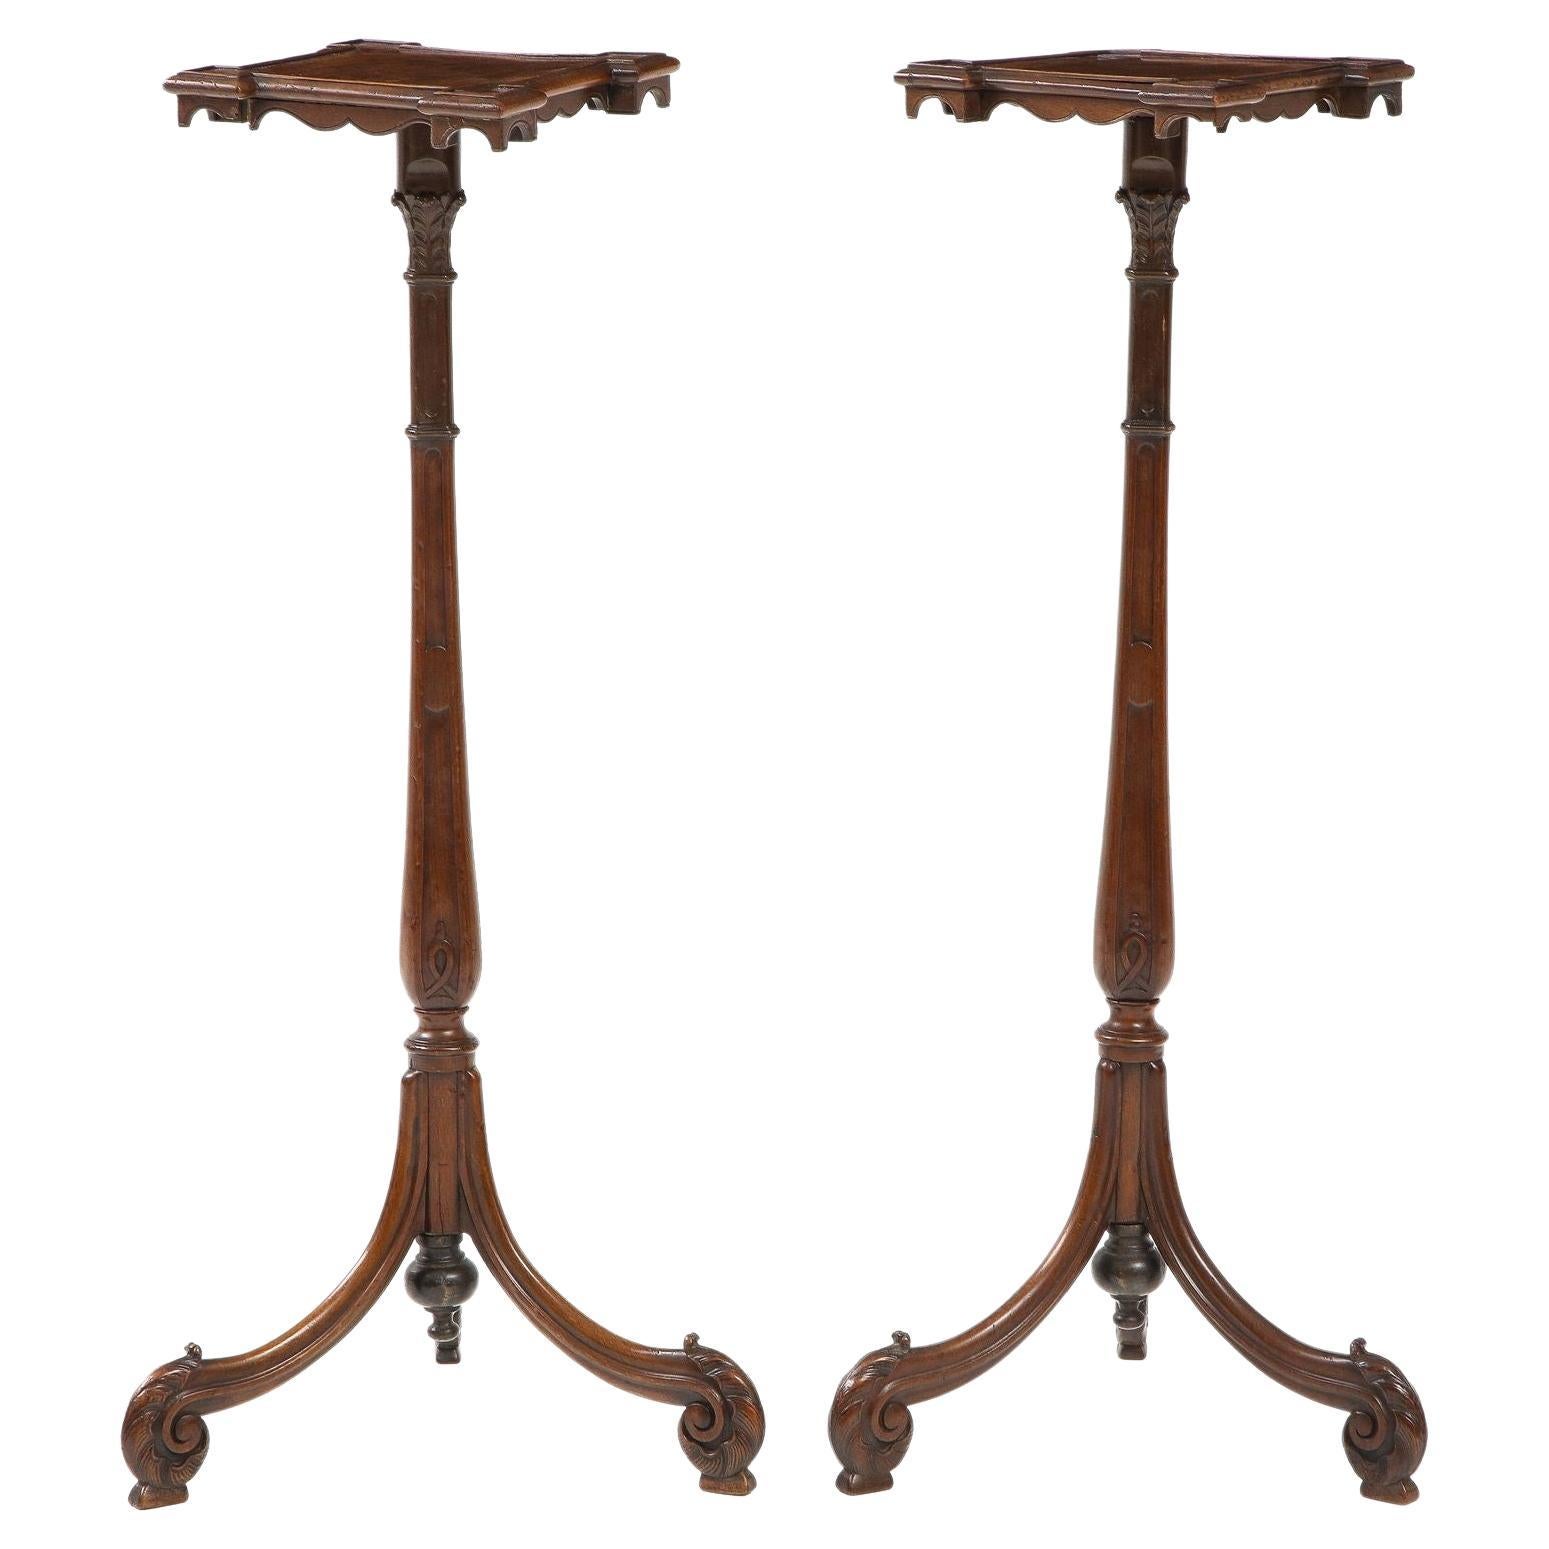 A Pair of Finely Carved Georgian Quatrefoil Mahogany Stands